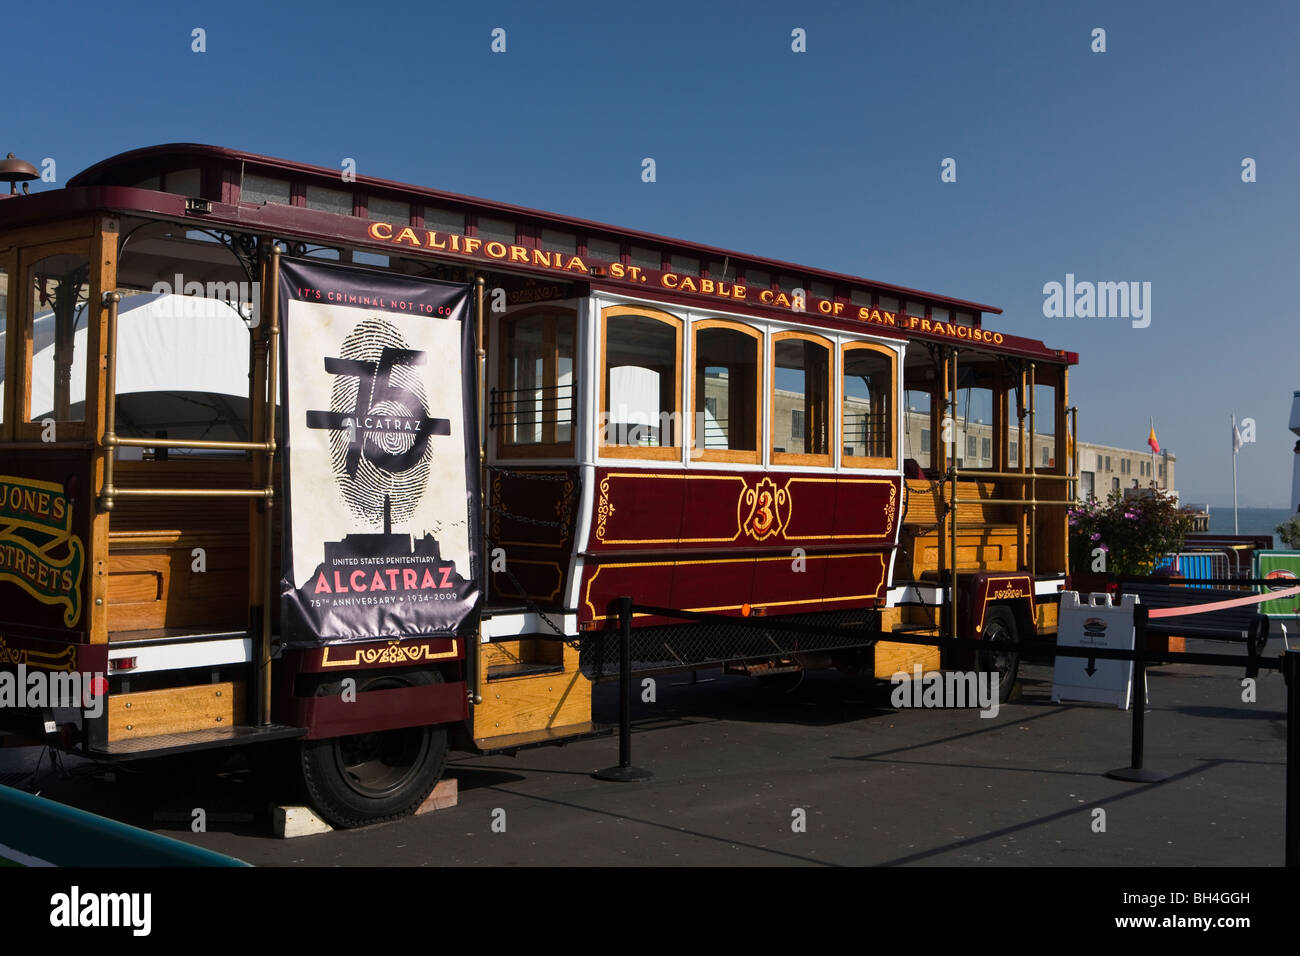 A California Street Cable Car of San Francisco is parked at Pier 33 where tourists board ferries to Alcatraz Island San Franciso Stock Photo